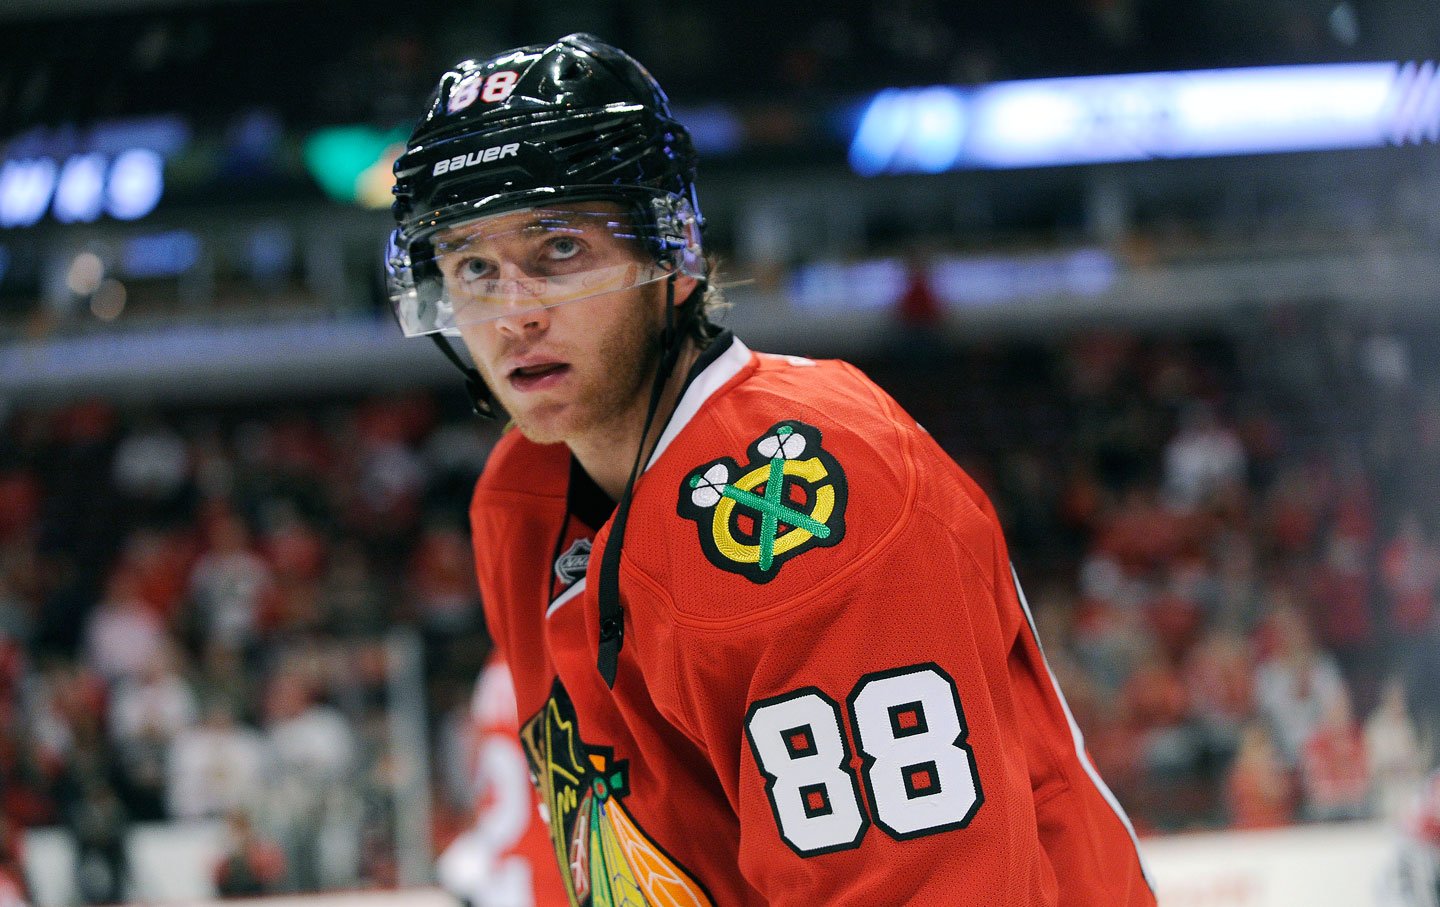 The Patrick Kane Case Marks a New Low in the Long History of Rape Accusations Against Athletes